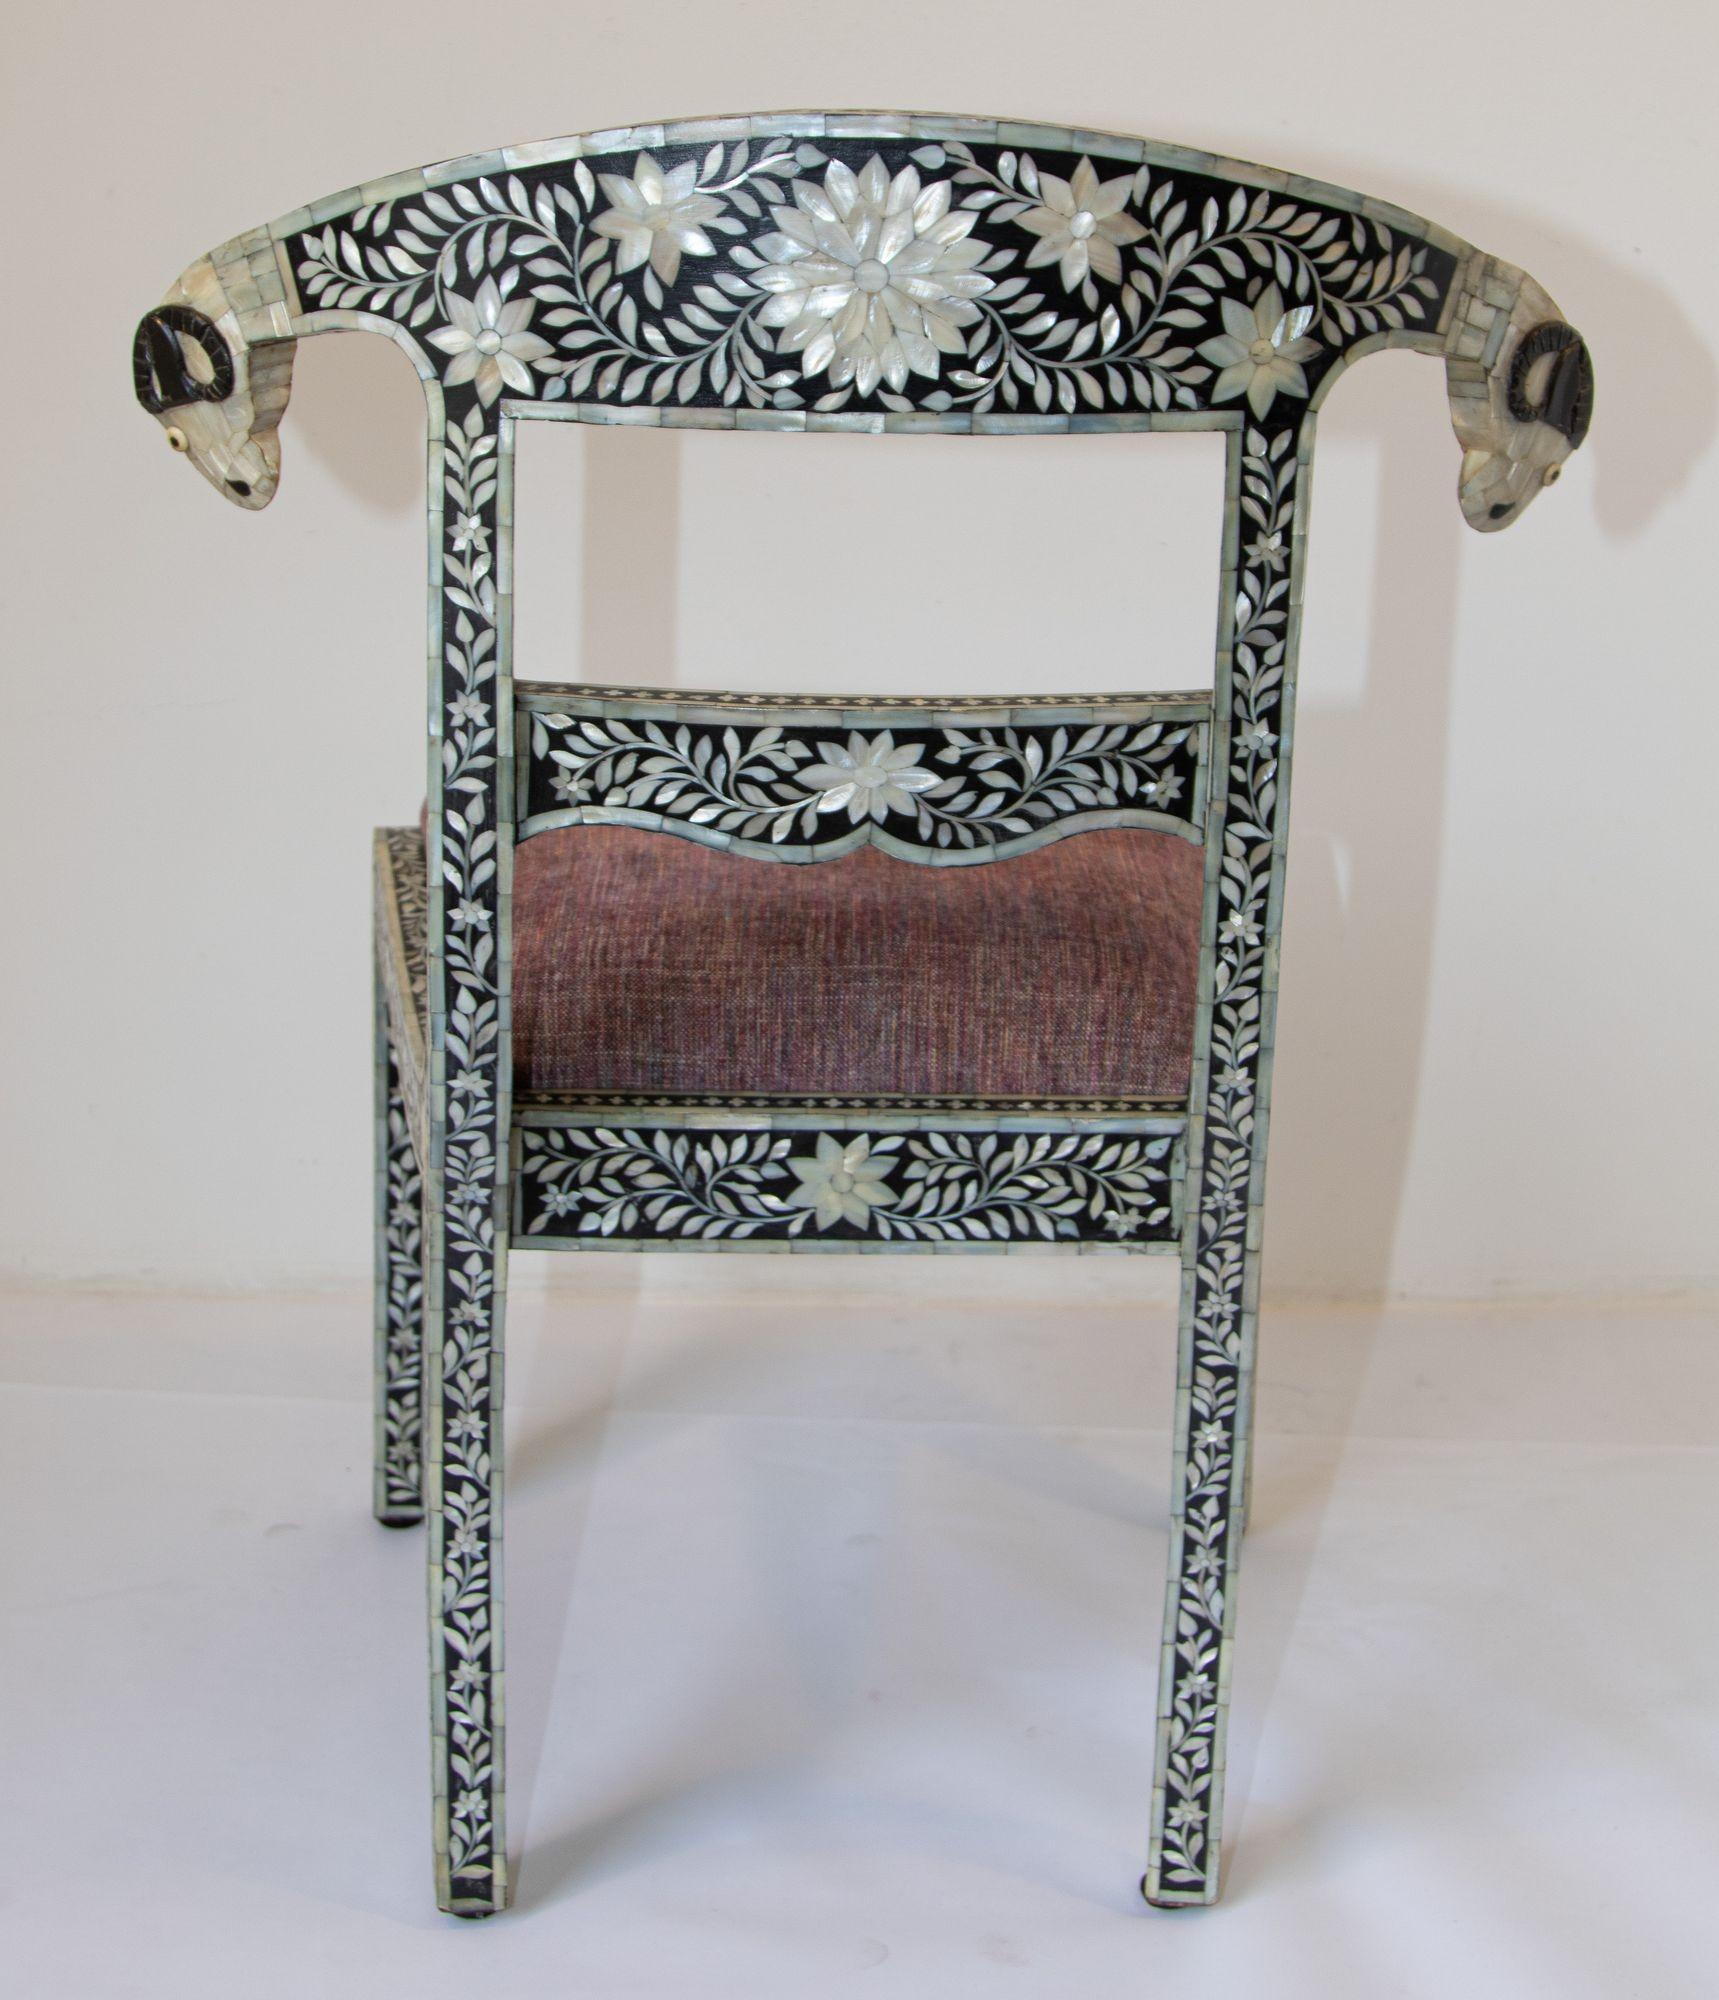 Antique Anglo-Indian Mughal Mother of Pearl Inlaid Side Chair with Ram's Head.
very collectable and rare to find we also have the armchairs available.
Anglo-Indian Mughal black and white mother of pearl and bone inlaid collectable chair with ram